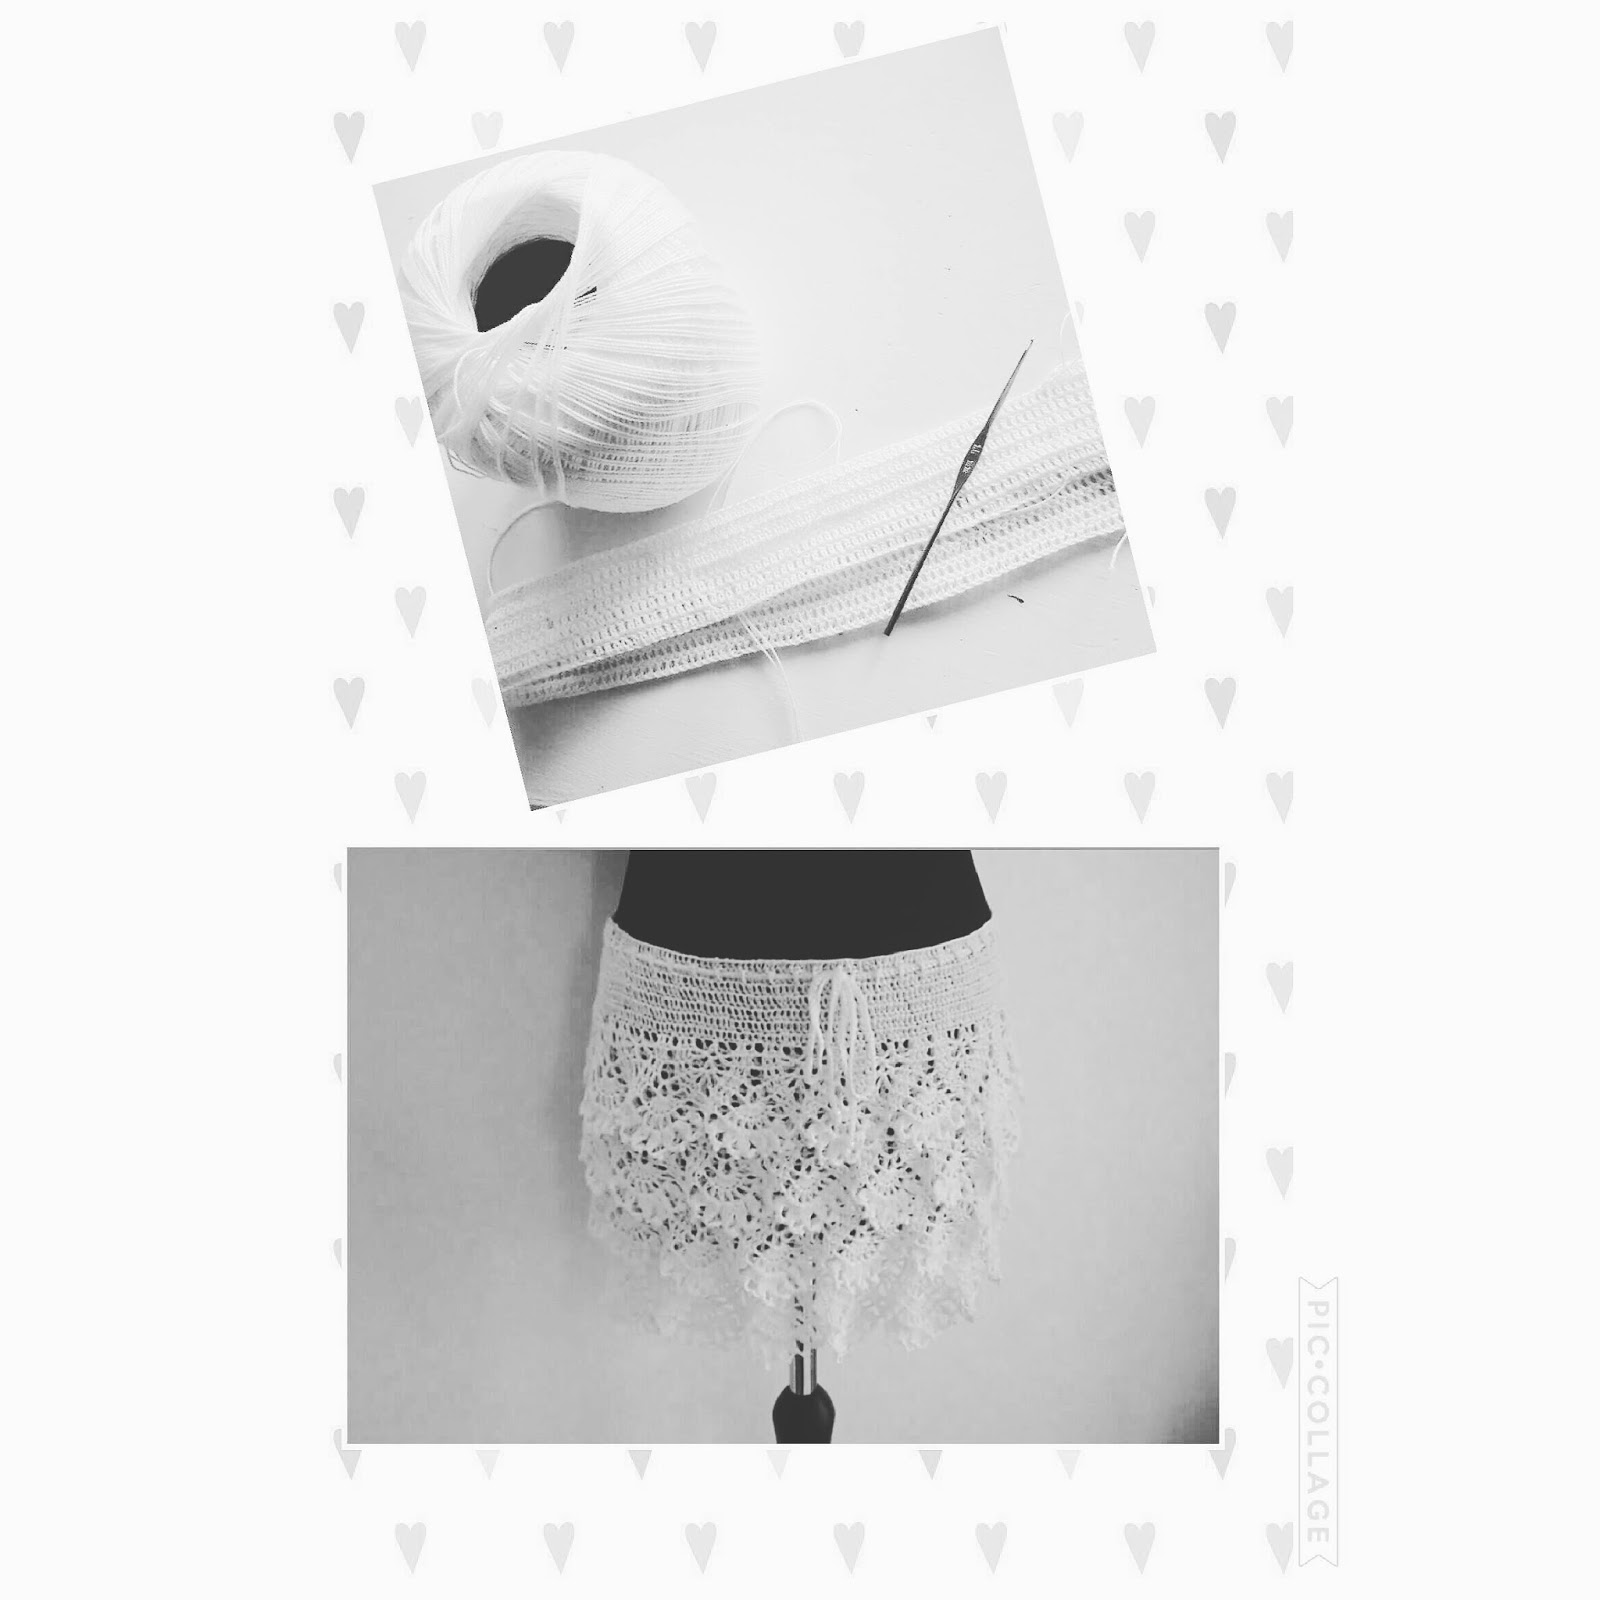 Crocheted lace skirt